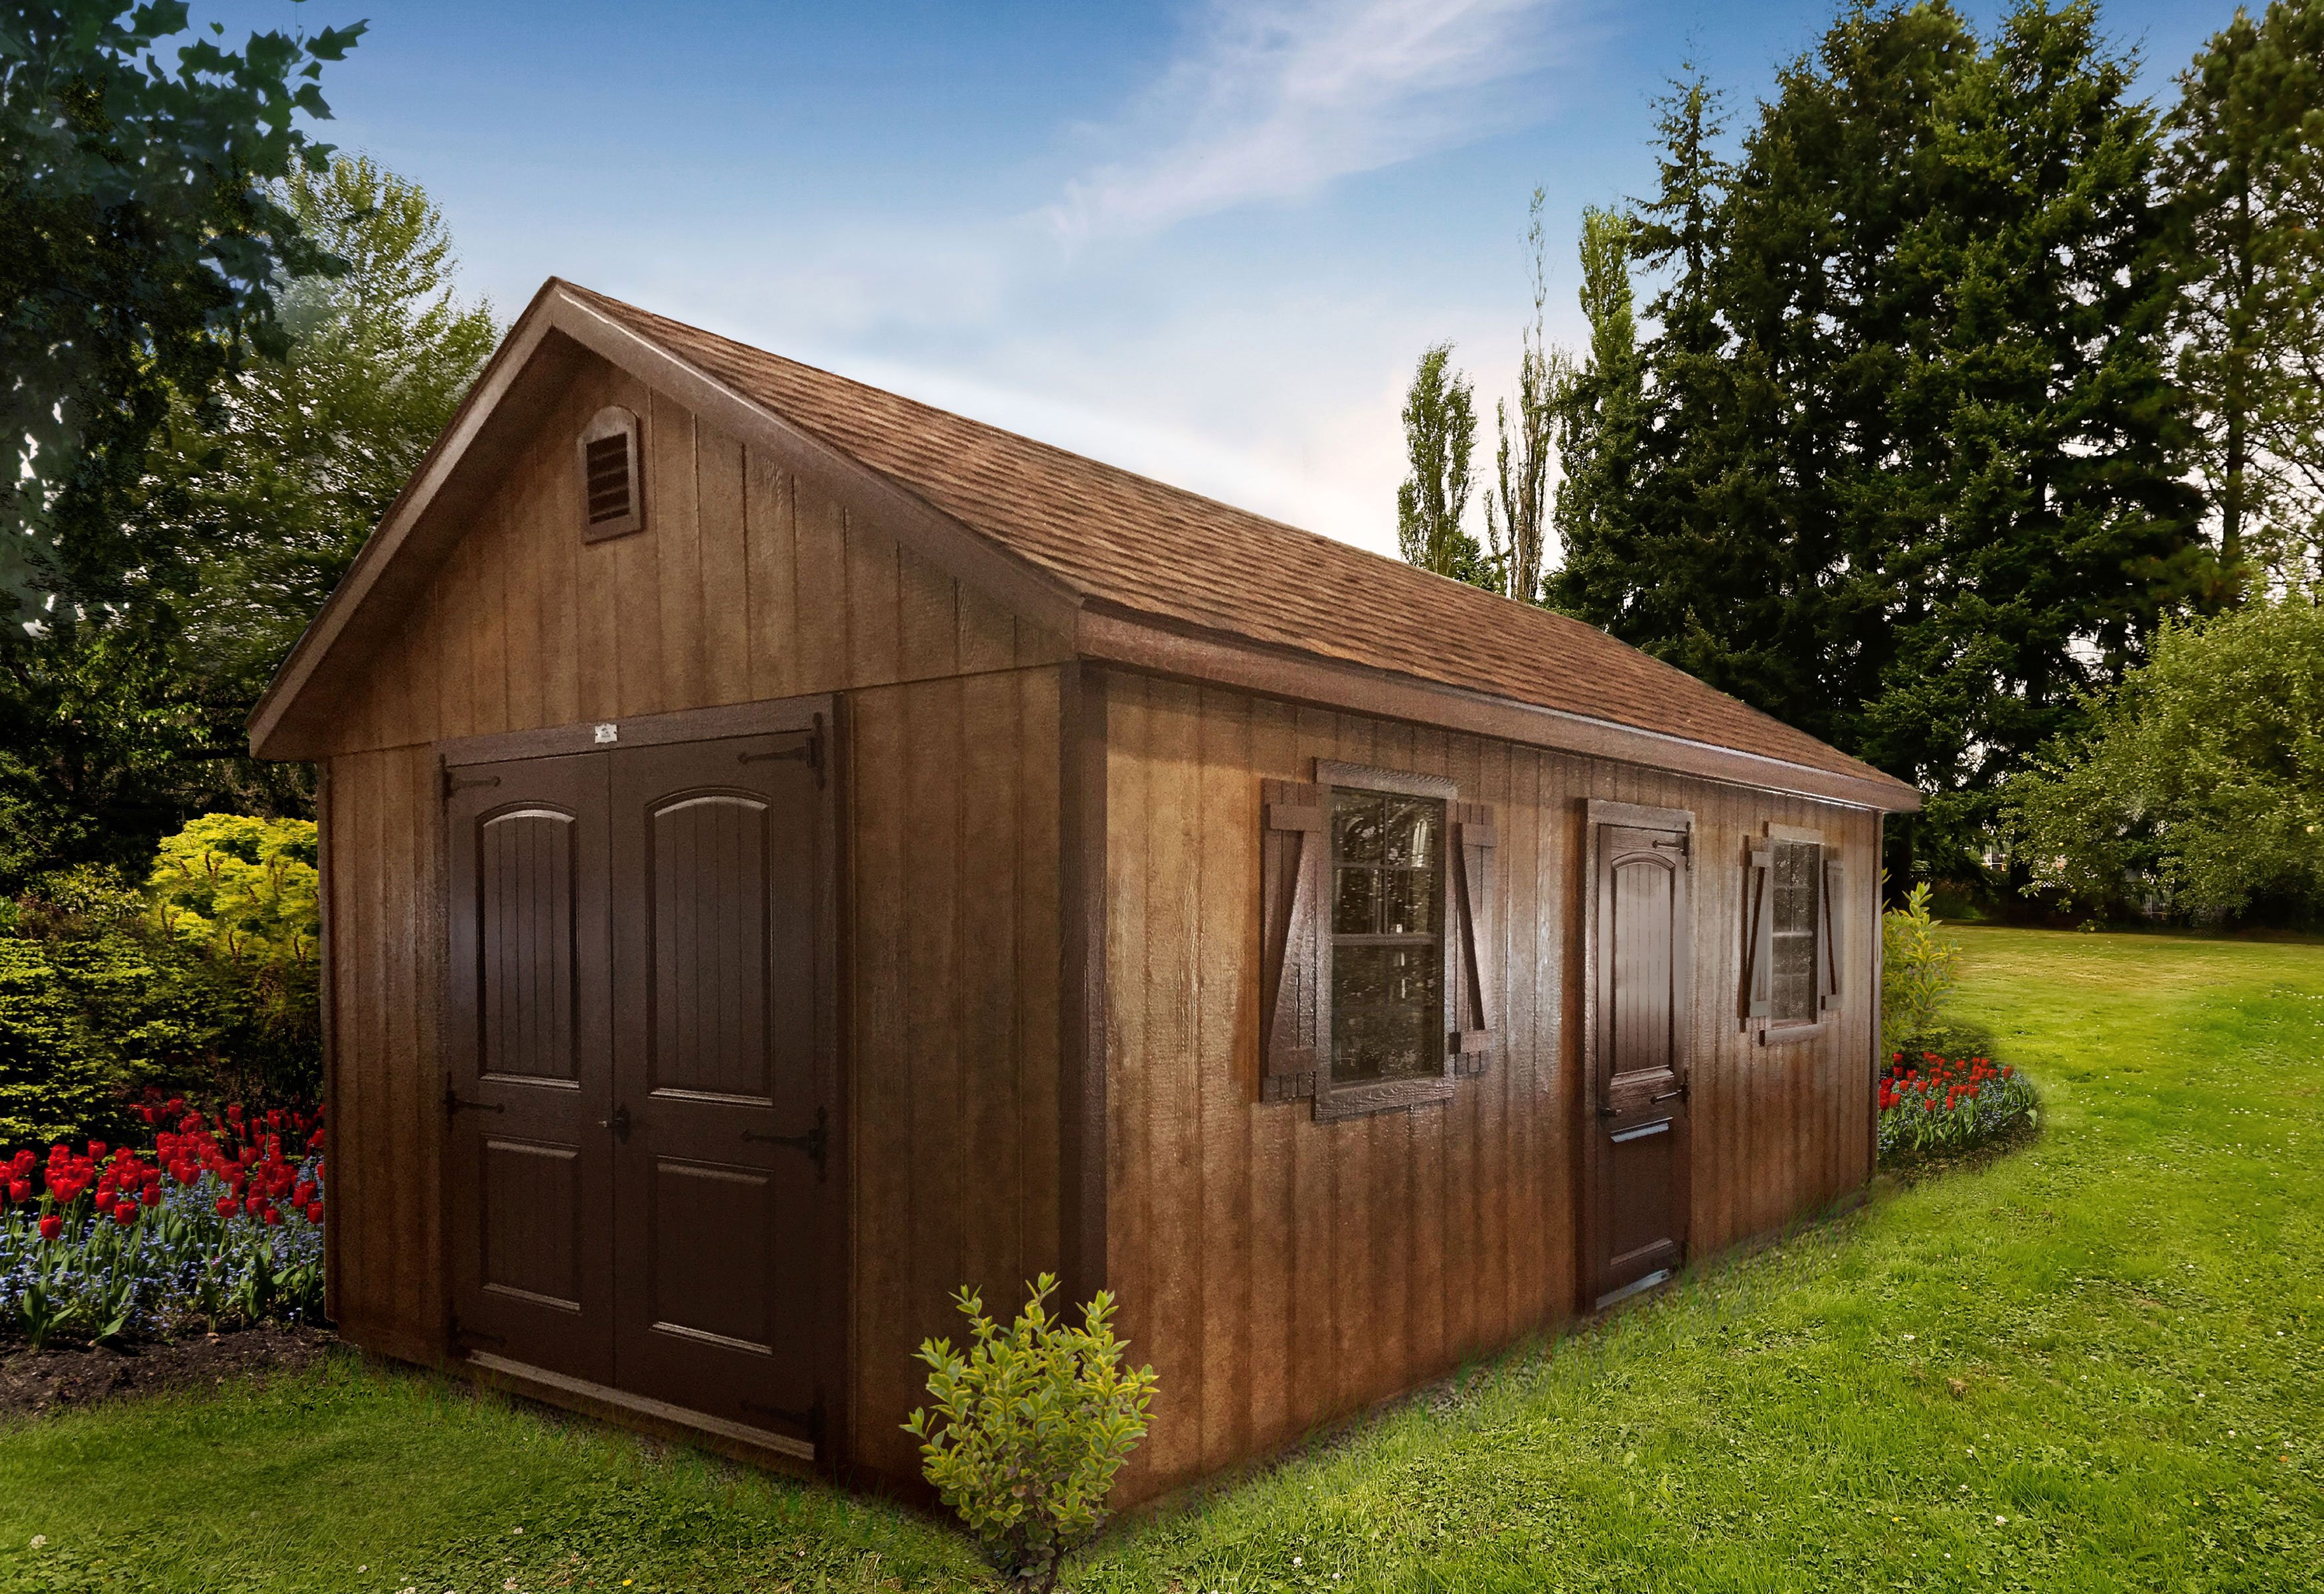 5 Reasons Why Vinyl Sheds Are the Best Choice for Outdoor Storage